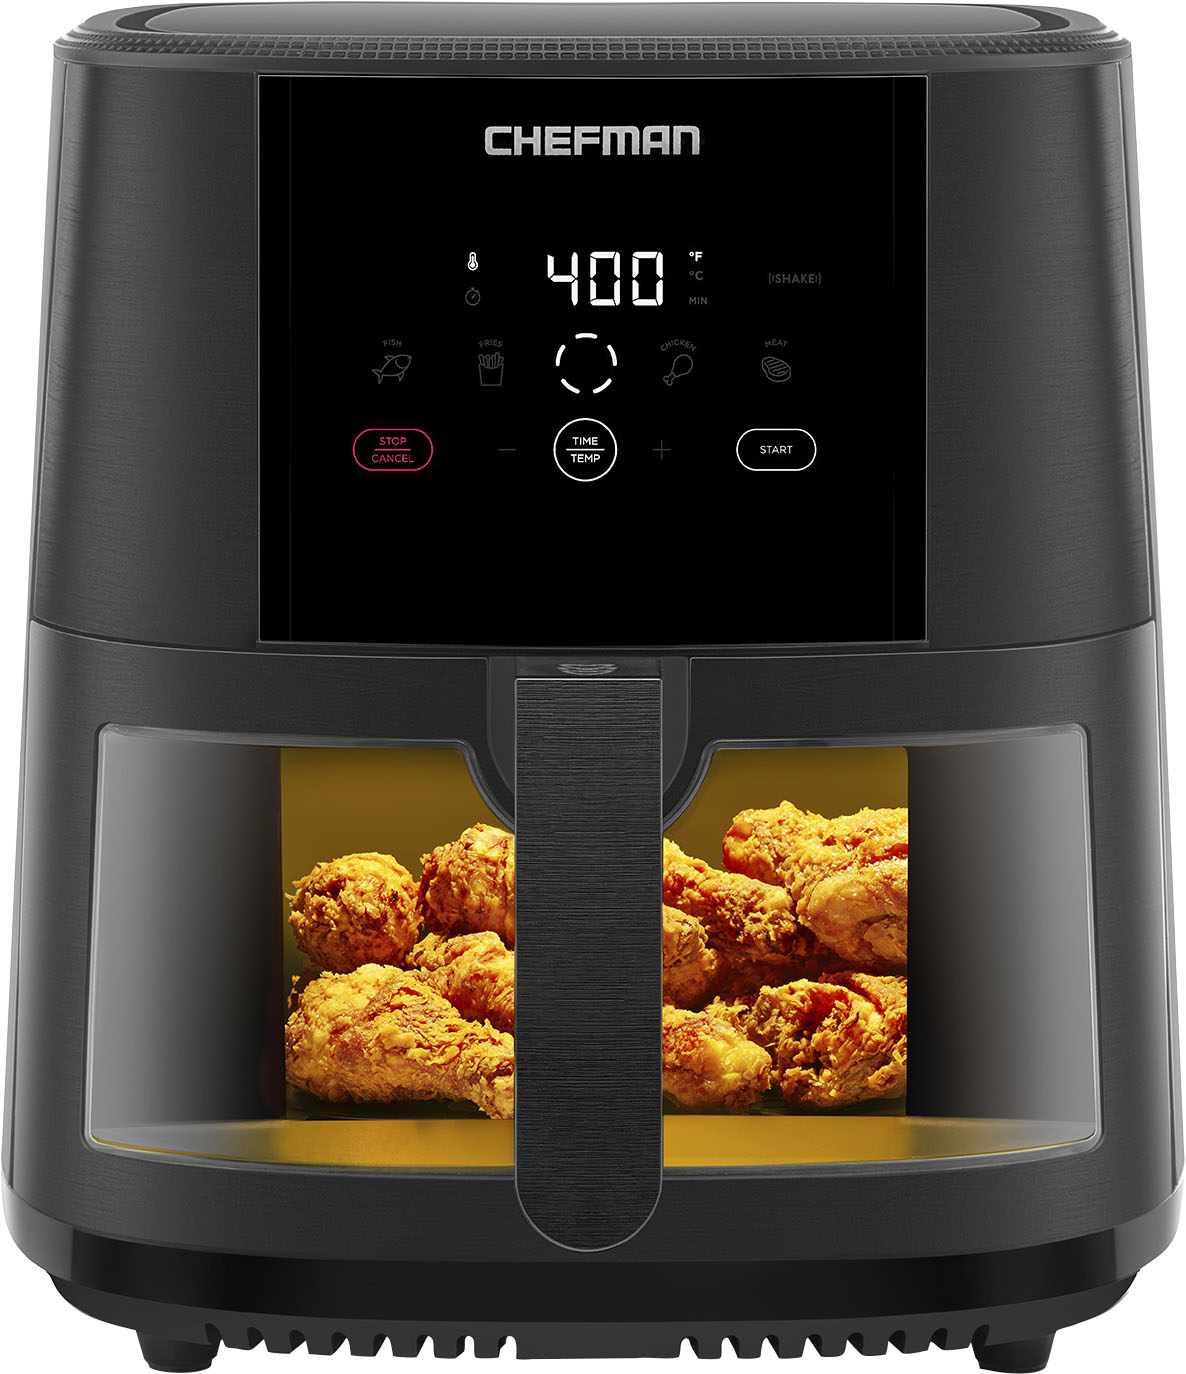 Chefman – TurboFry Touch 8 Qt Window Basket Air Fryer – Black – Just $49.99 at Best Buy